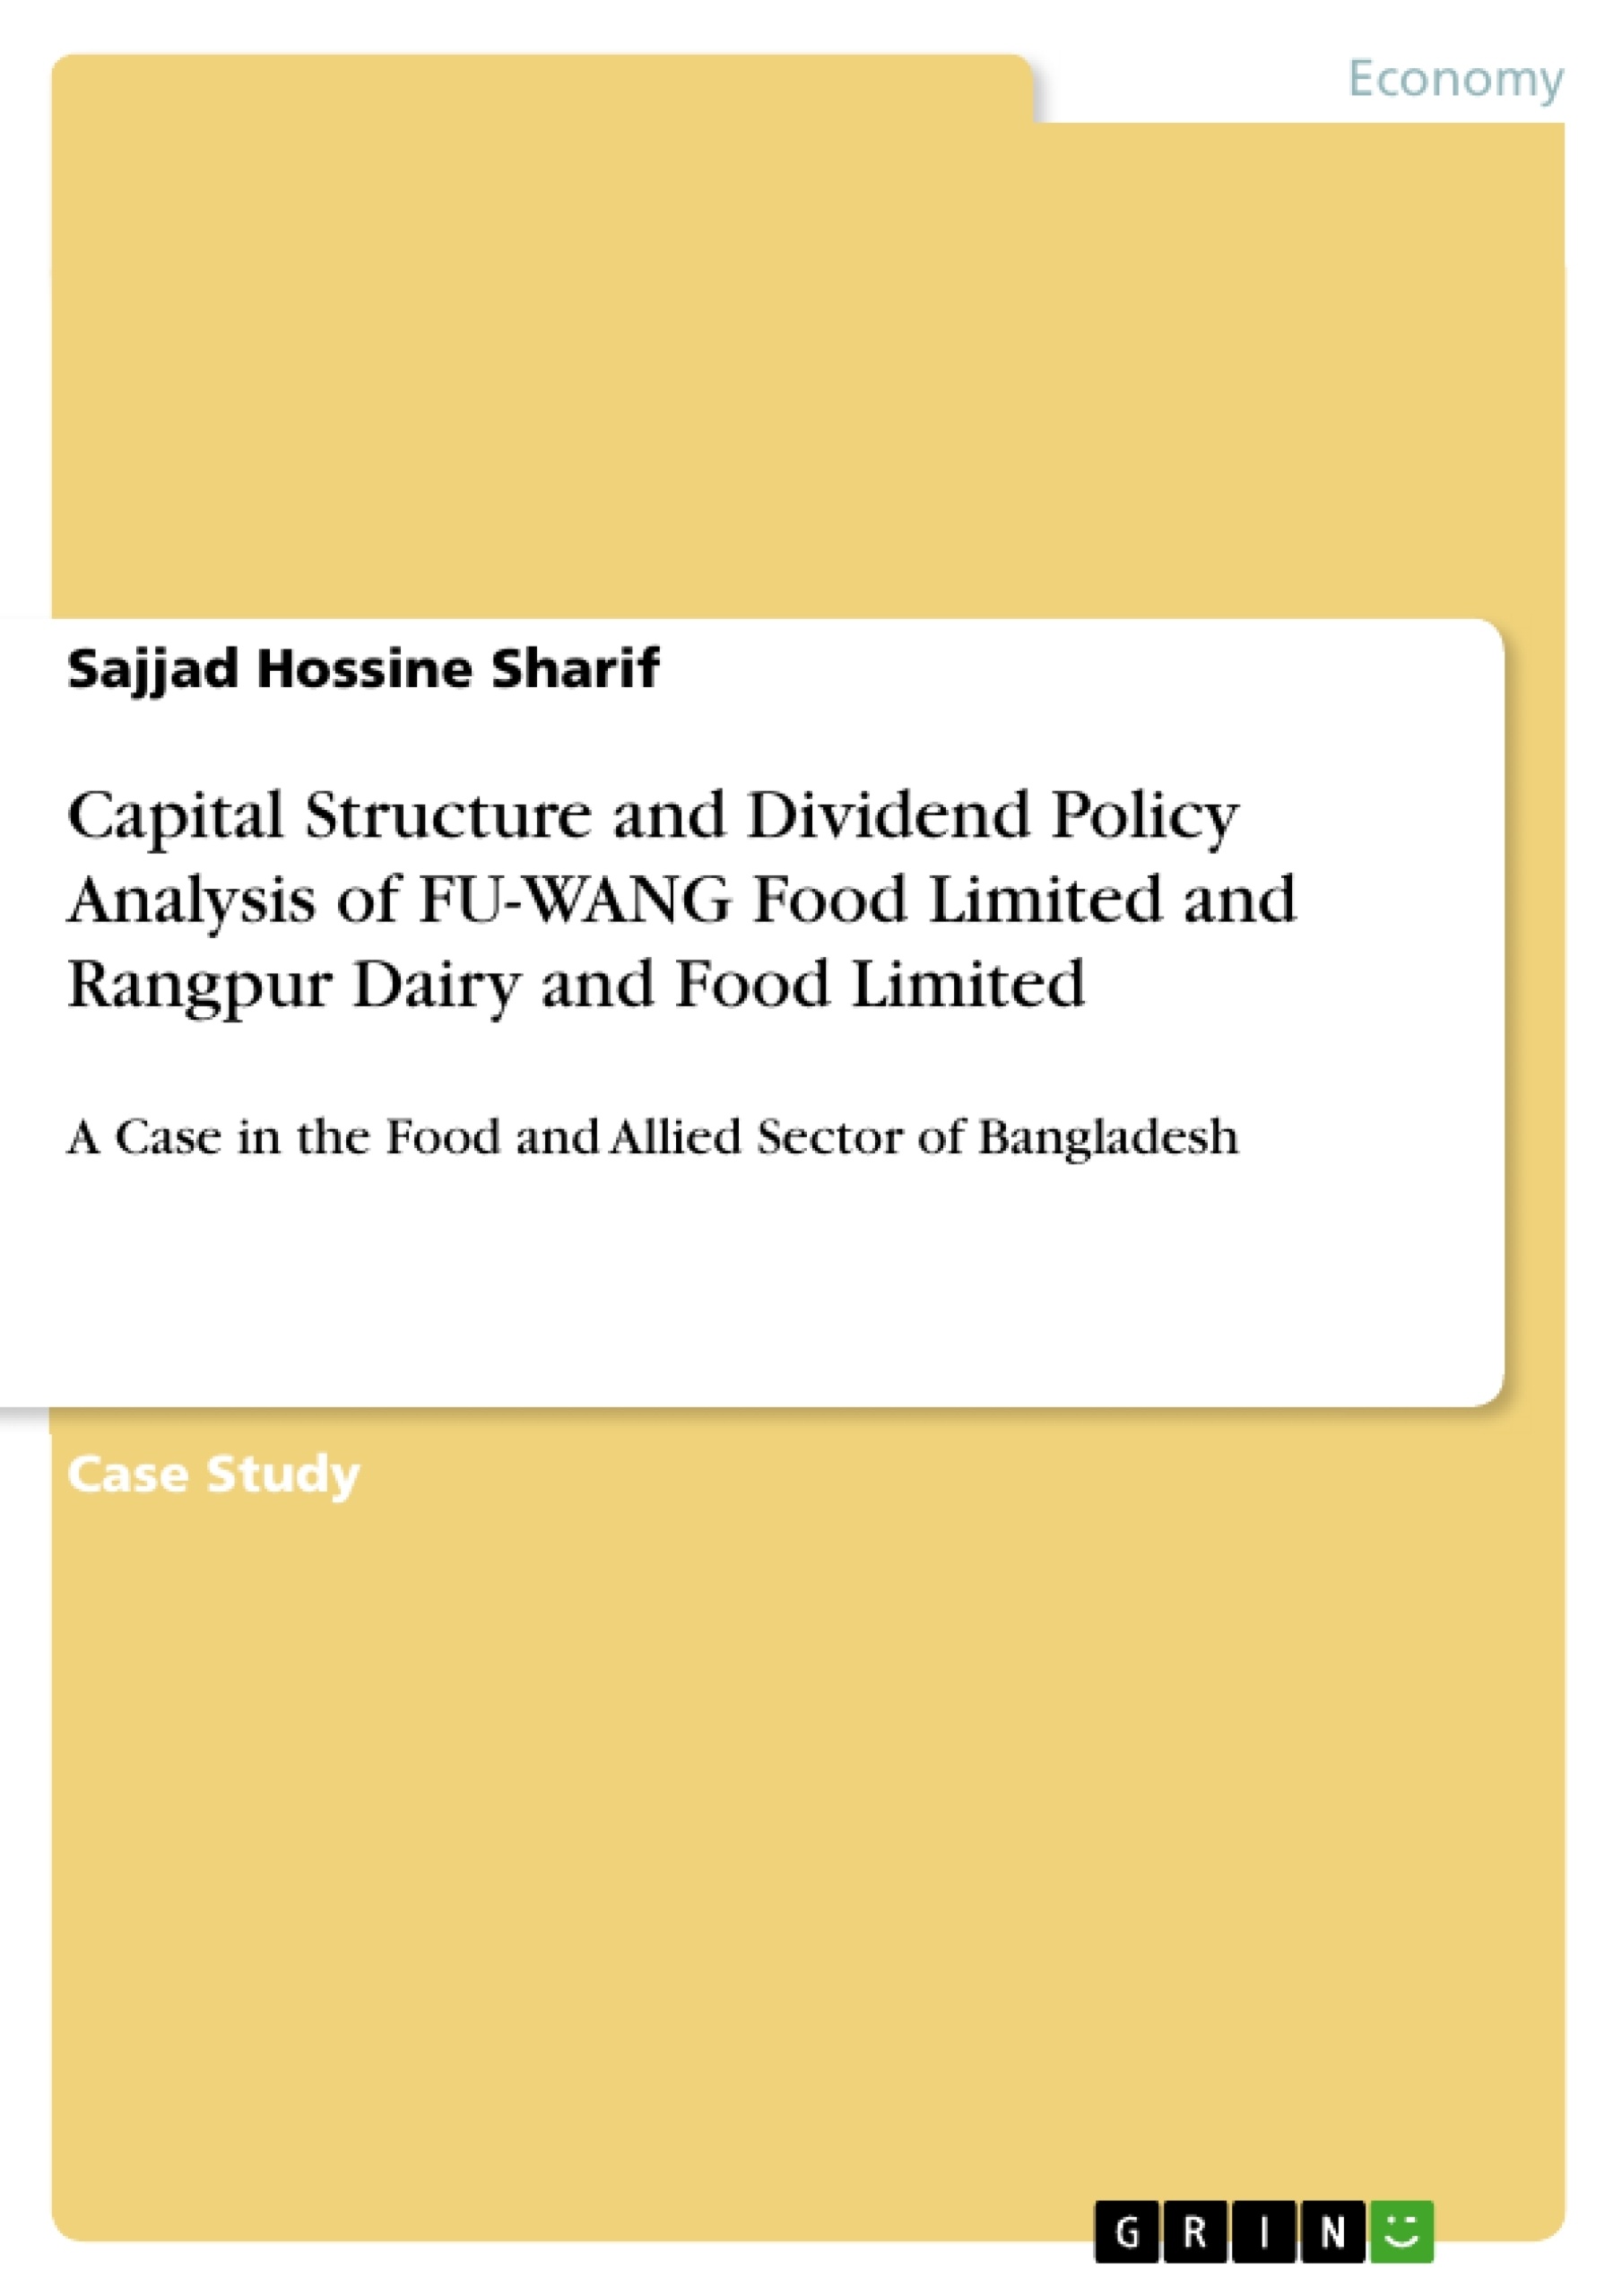 Title: Capital Structure and Dividend Policy Analysis of FU-WANG Food Limited and Rangpur Dairy and Food Limited